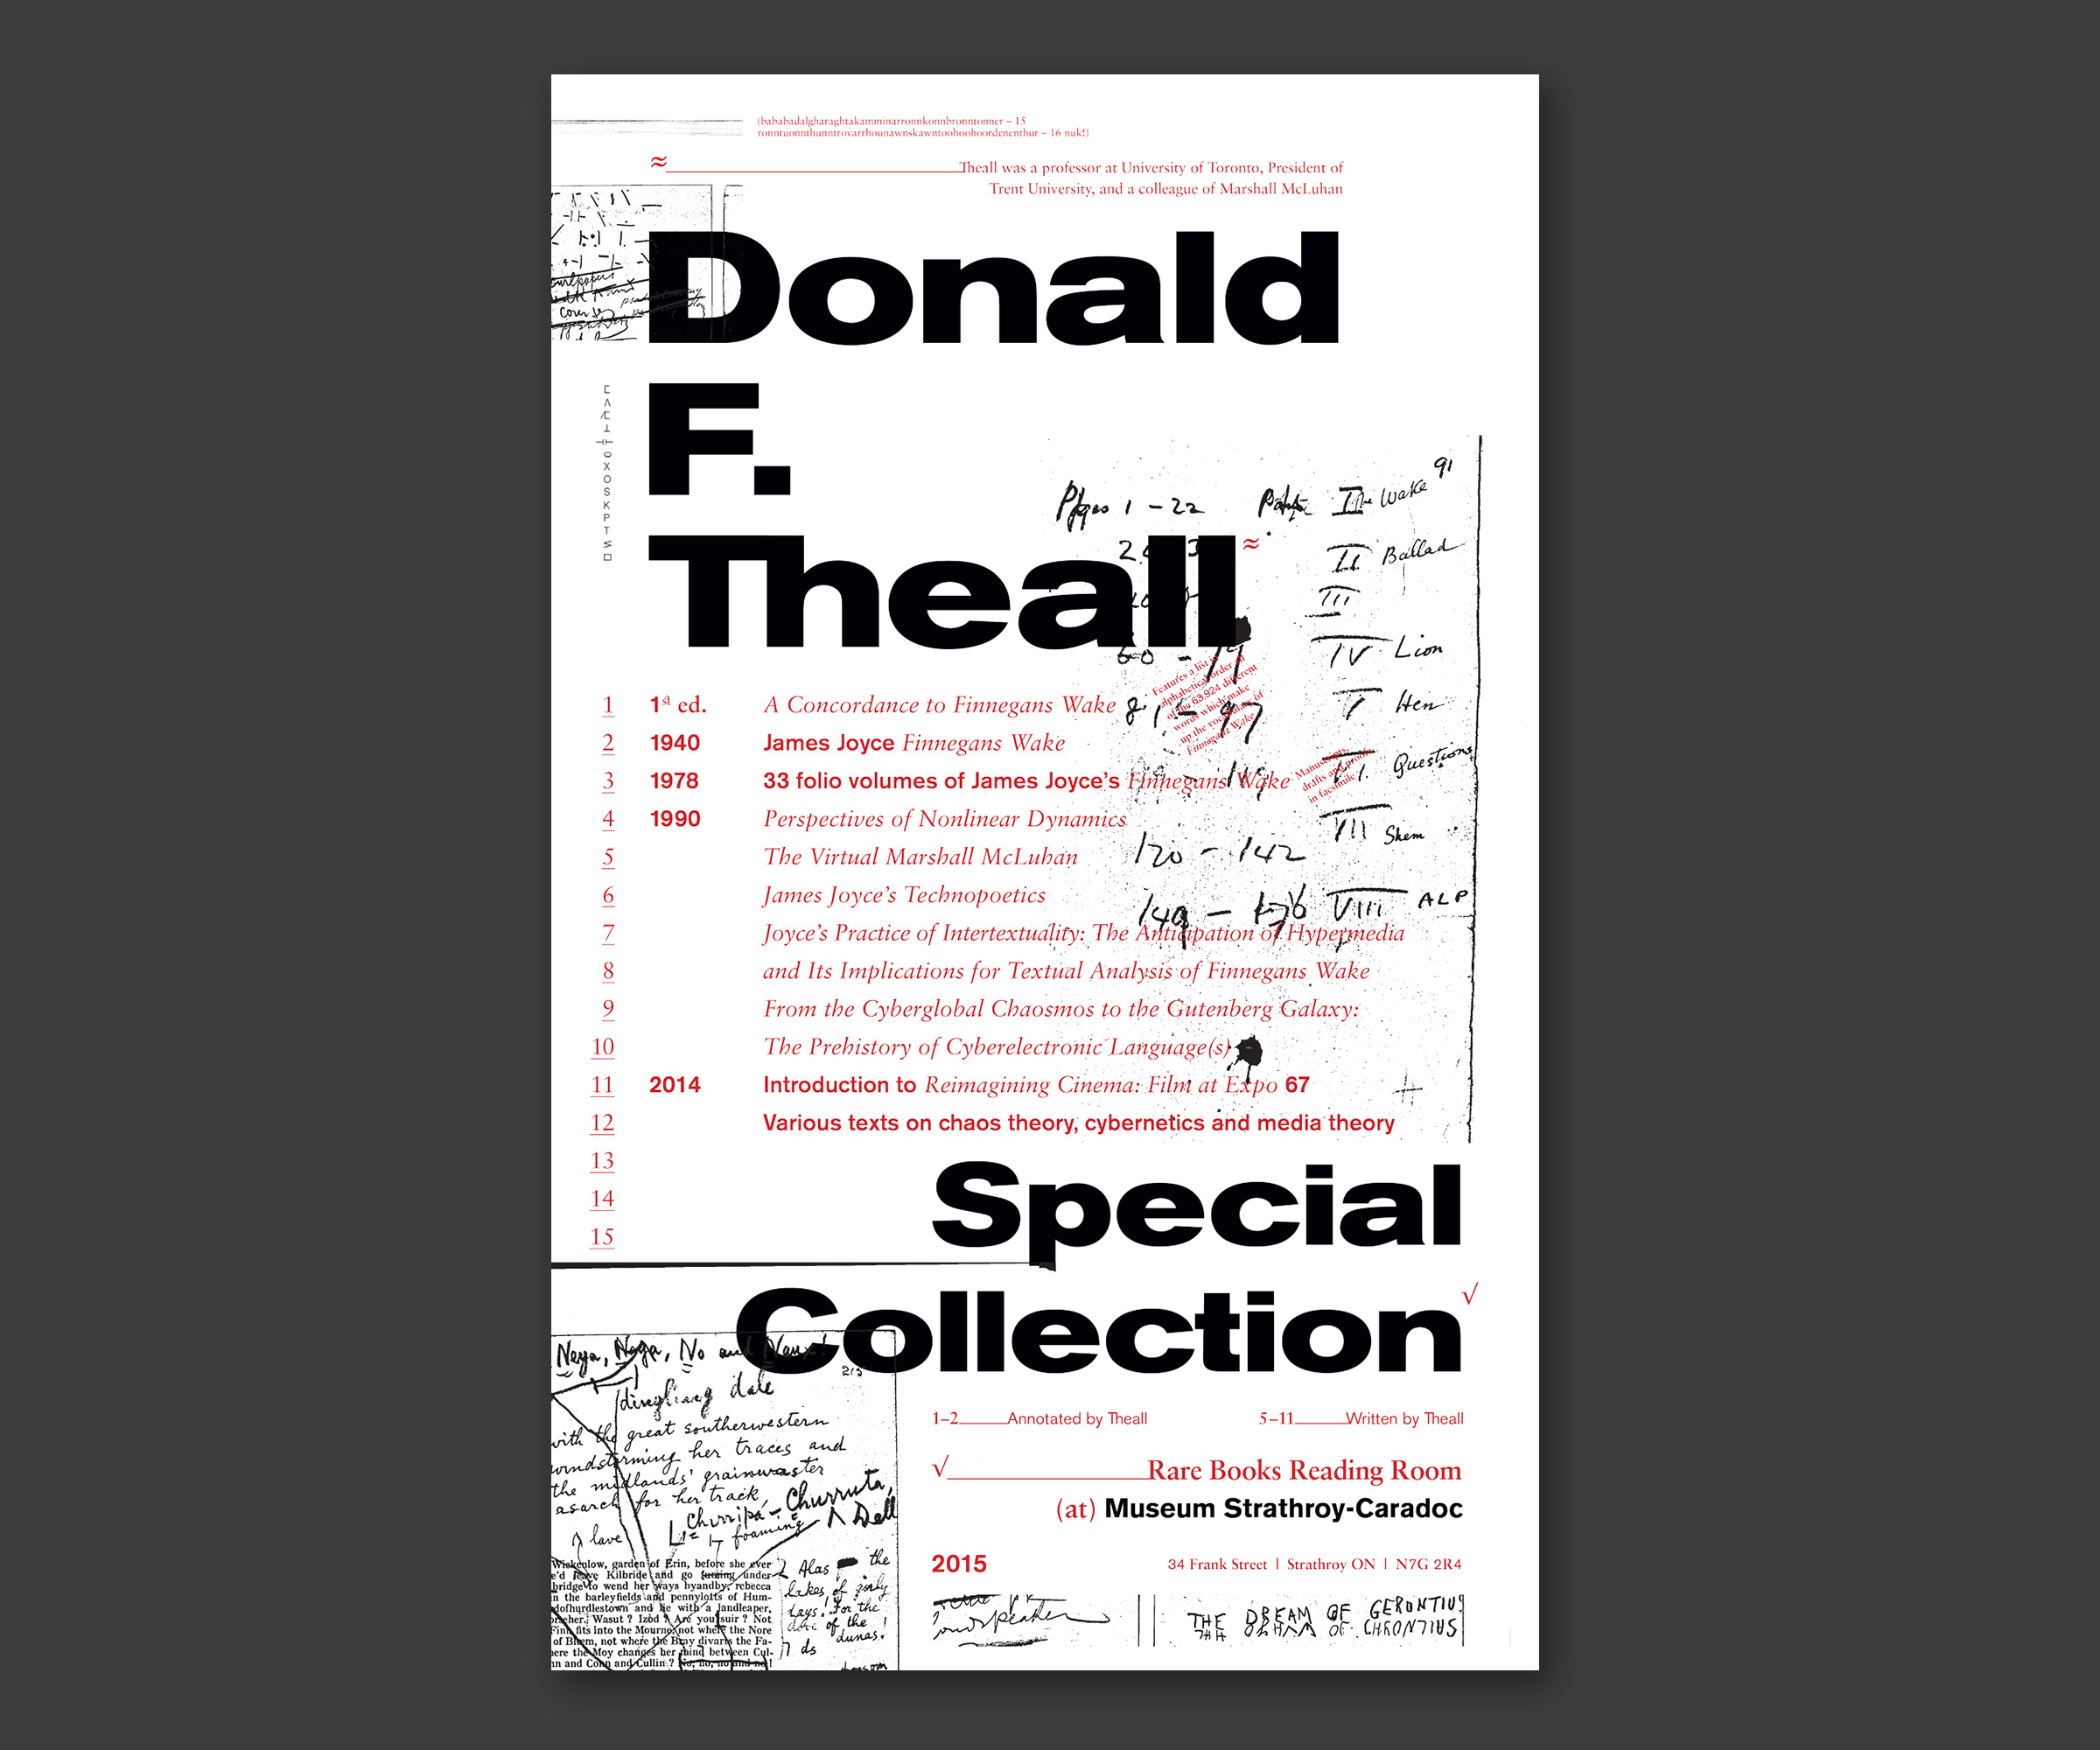 Strathroy Museum, Poster Series, Donald F. Theall Collection, 2014